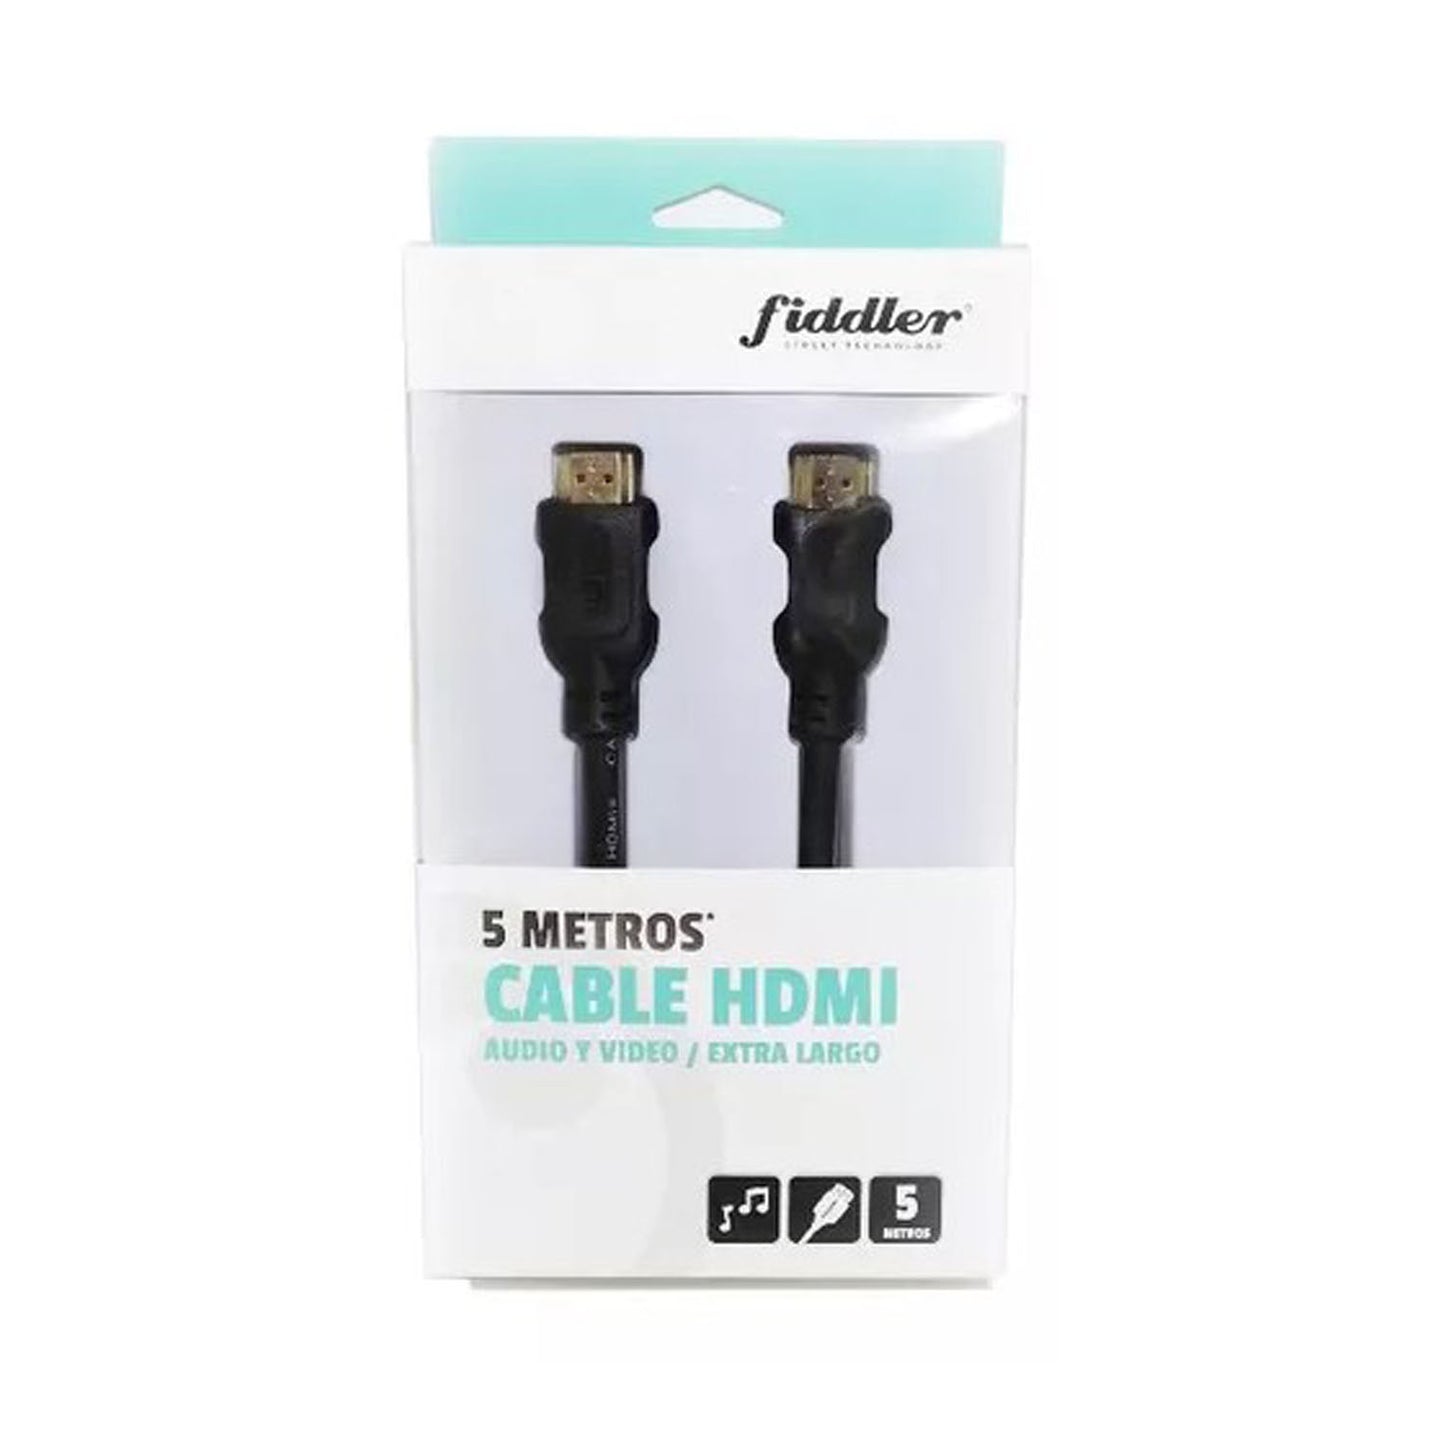 Cable HDMI Extra Largo 5MTS Fiddler FD-3350PRO - Crazygames